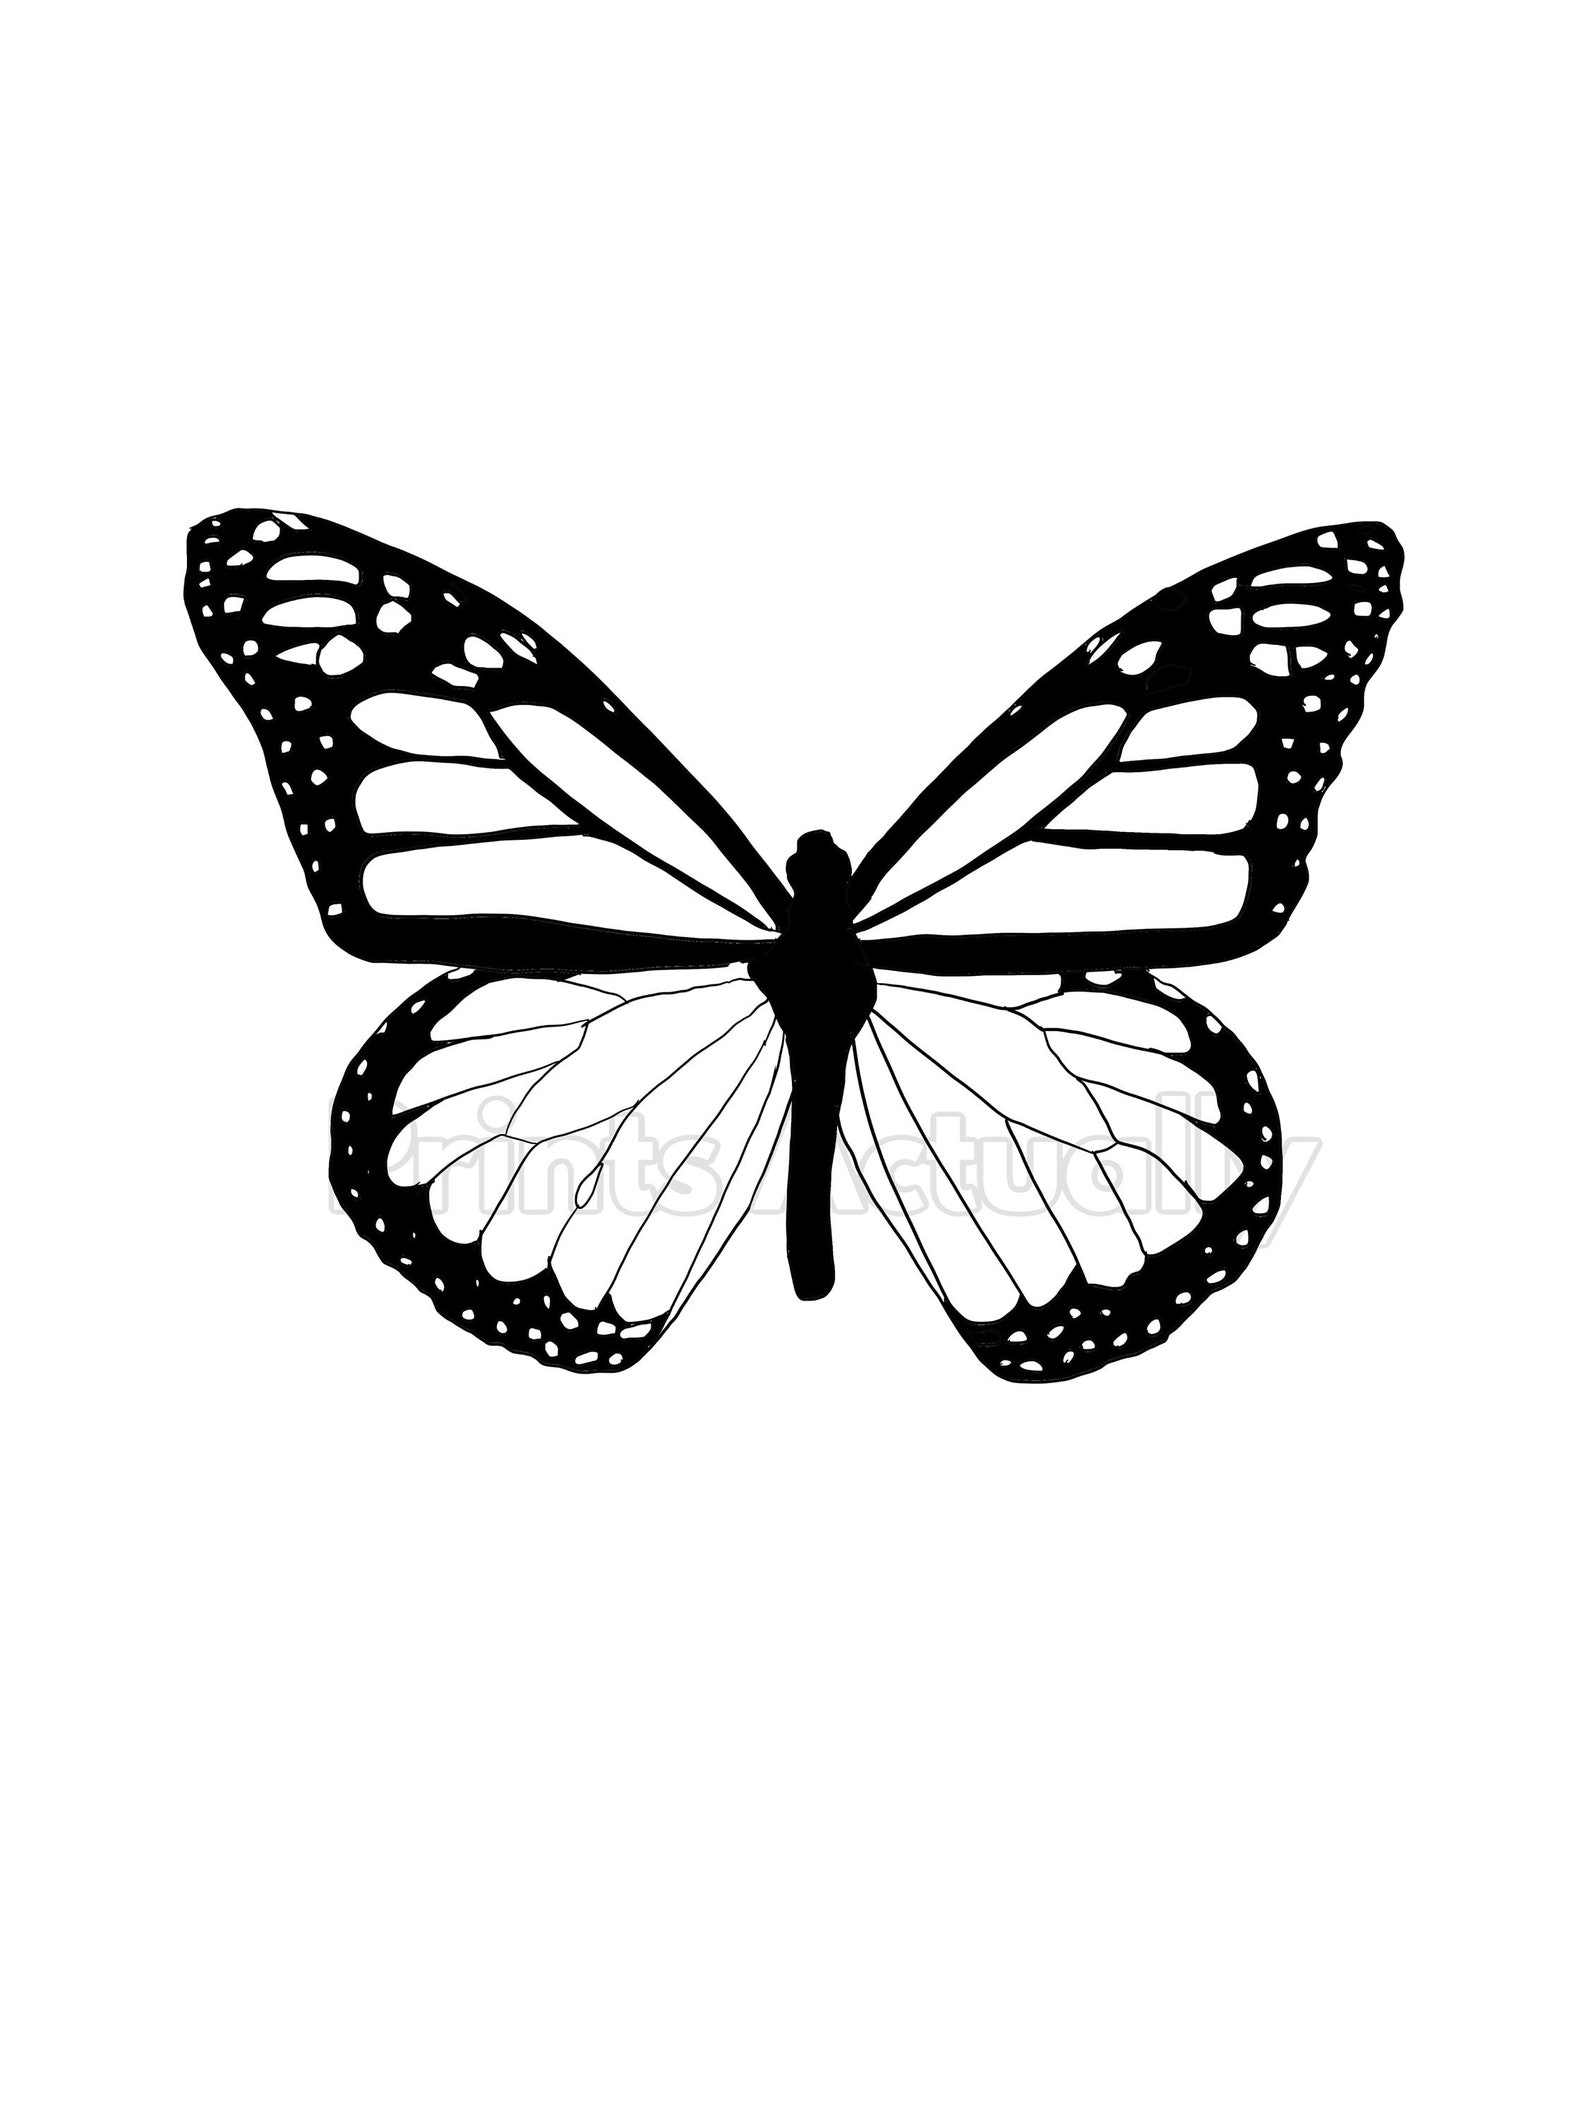 Butterfly Clipart, Transparent Background, Hand Drawn Butterfly ...